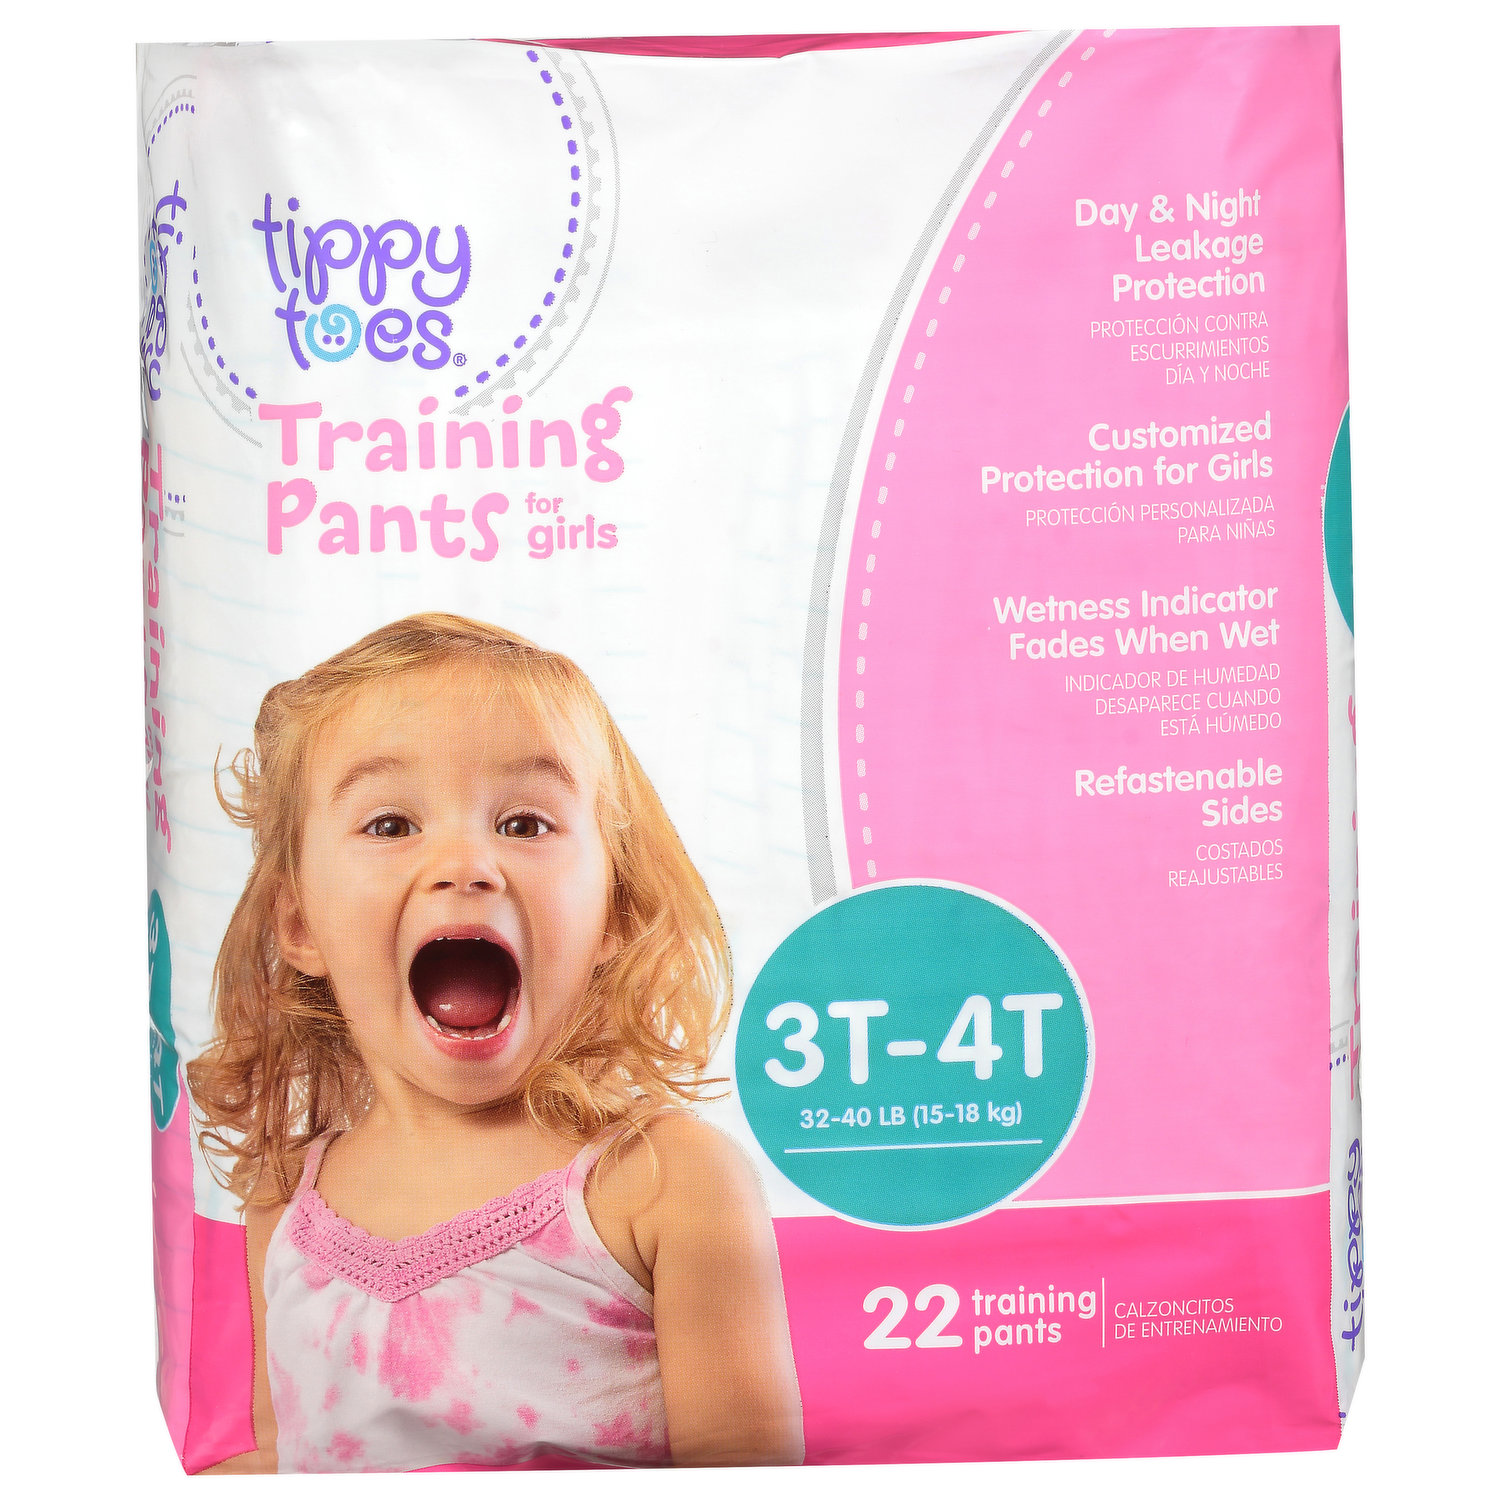 Tippy Toes Training Pants, for Girls, 3T-4T (32-40 lb) - FRESH by